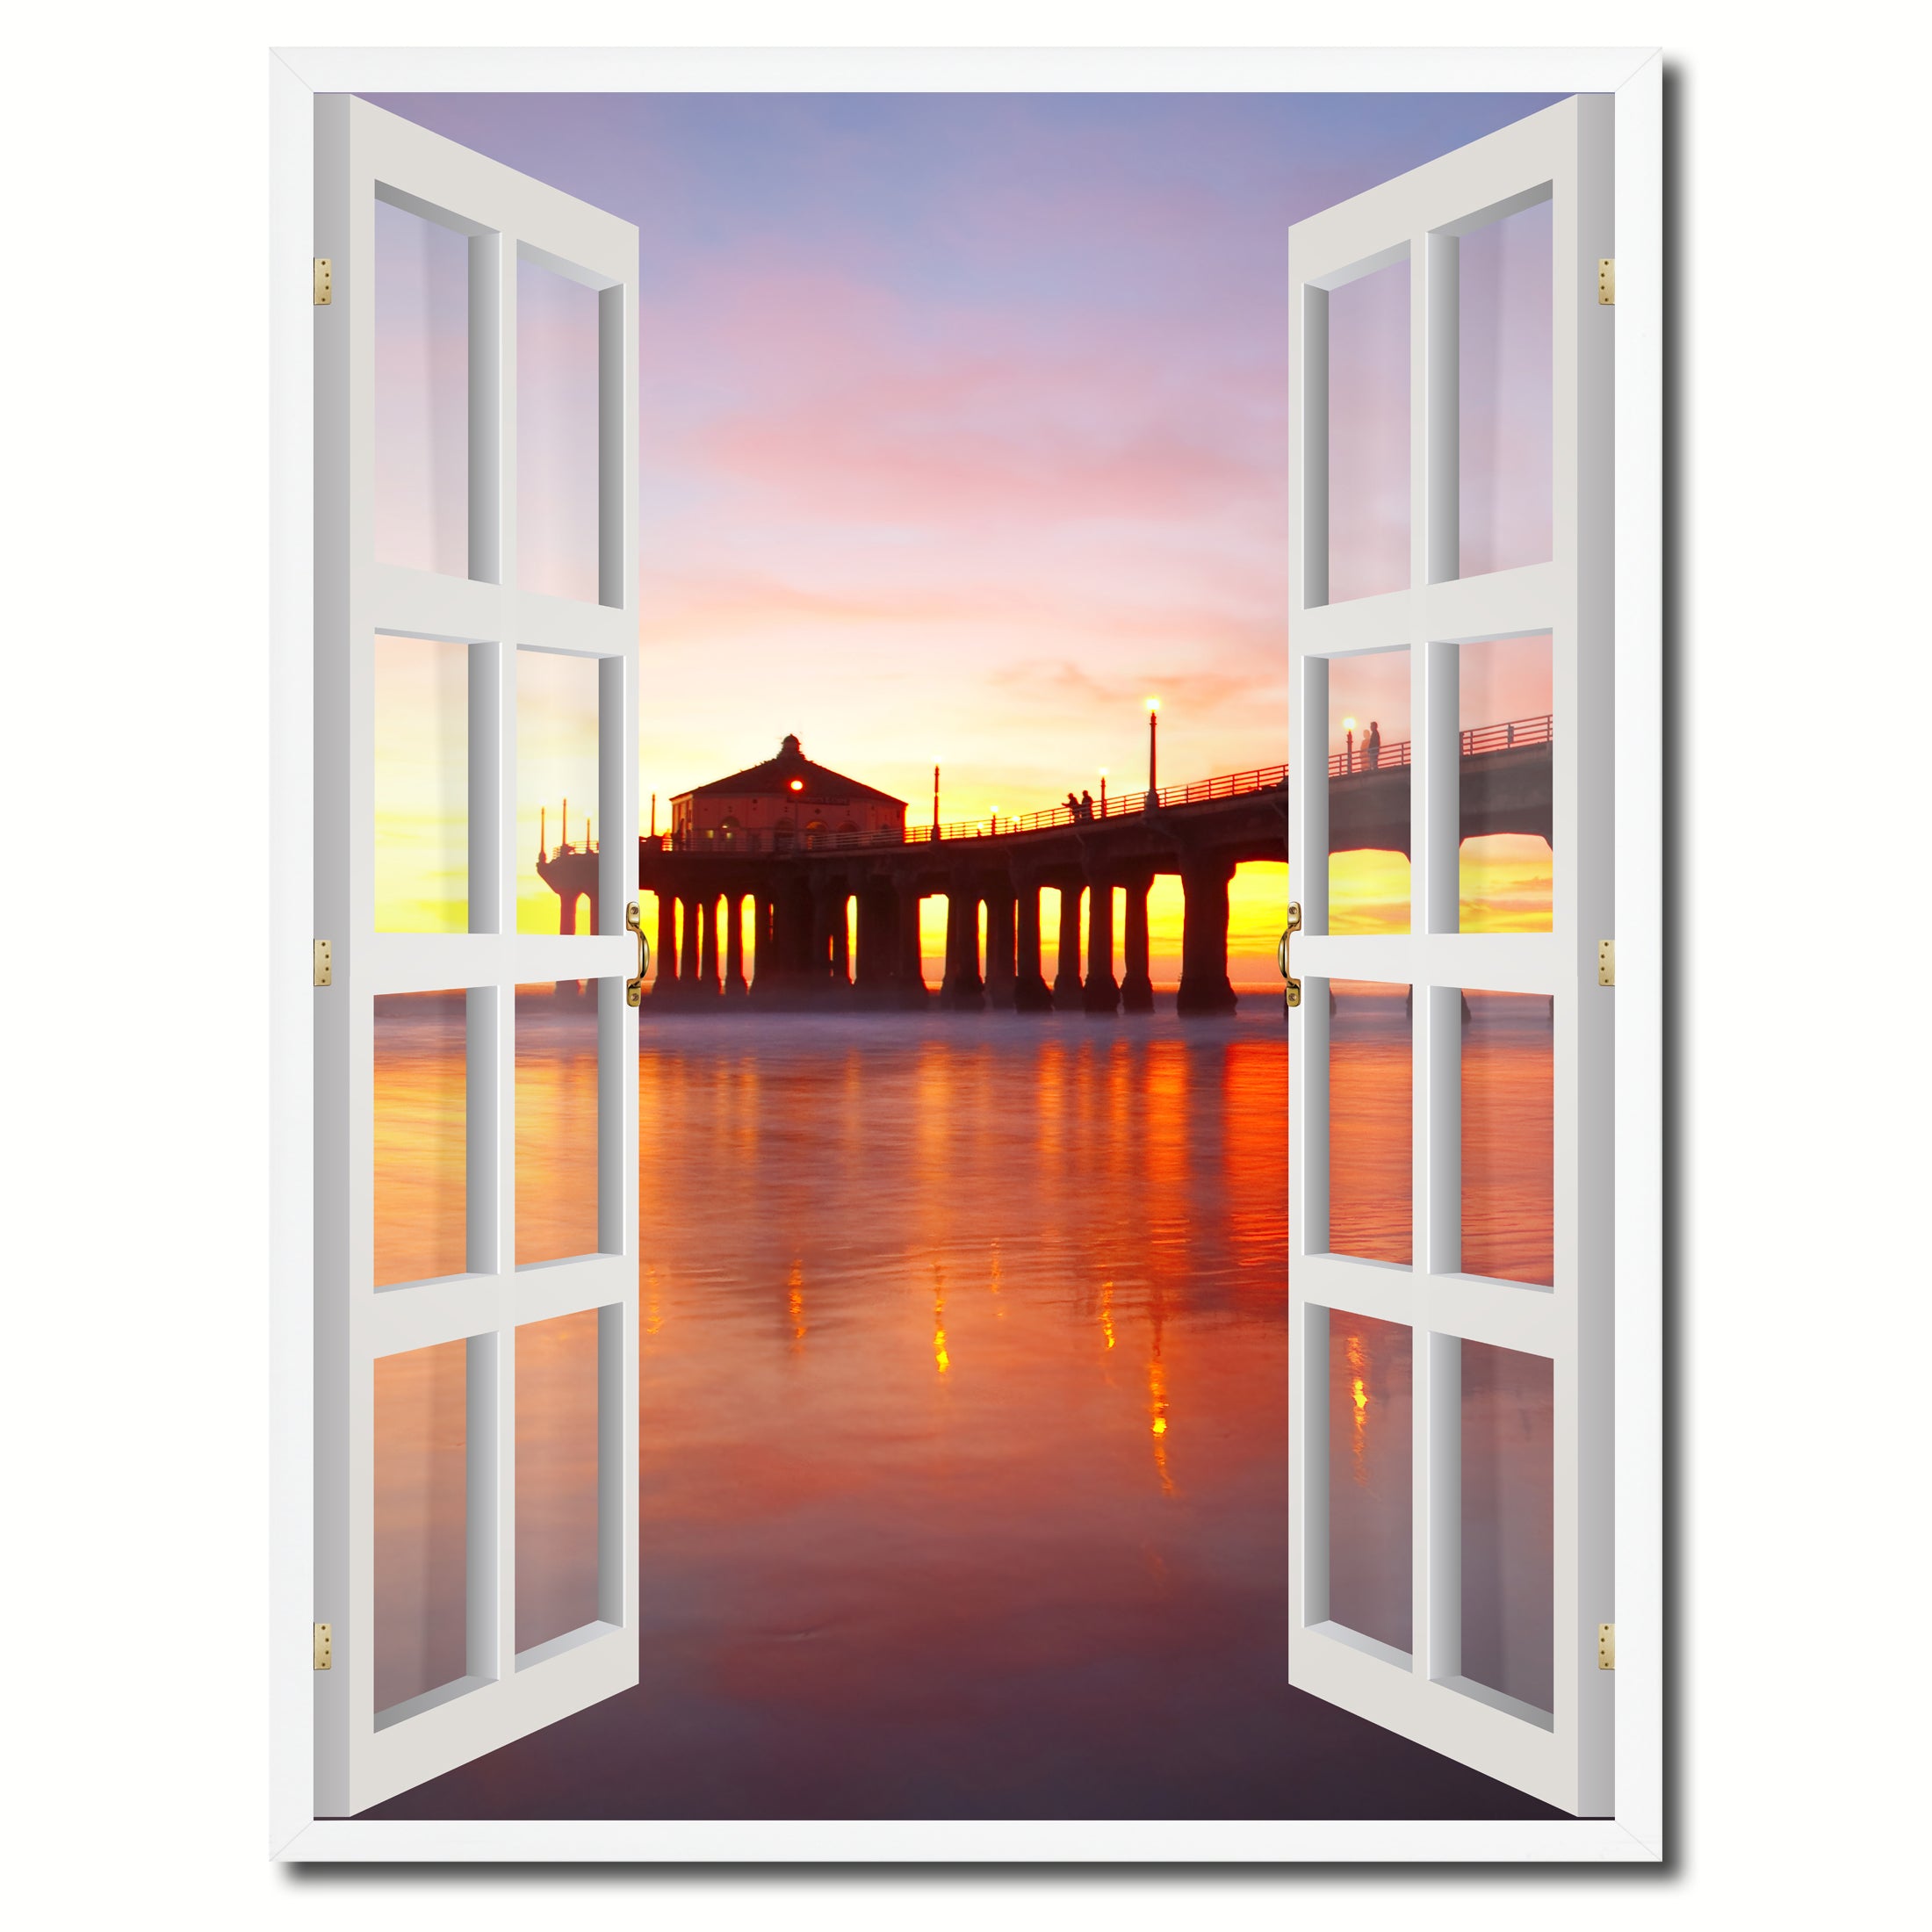 Manhattan Beach California Sunset View Picture French Window Canvas Print with Frame Gifts Home Decor Wall Art Collection